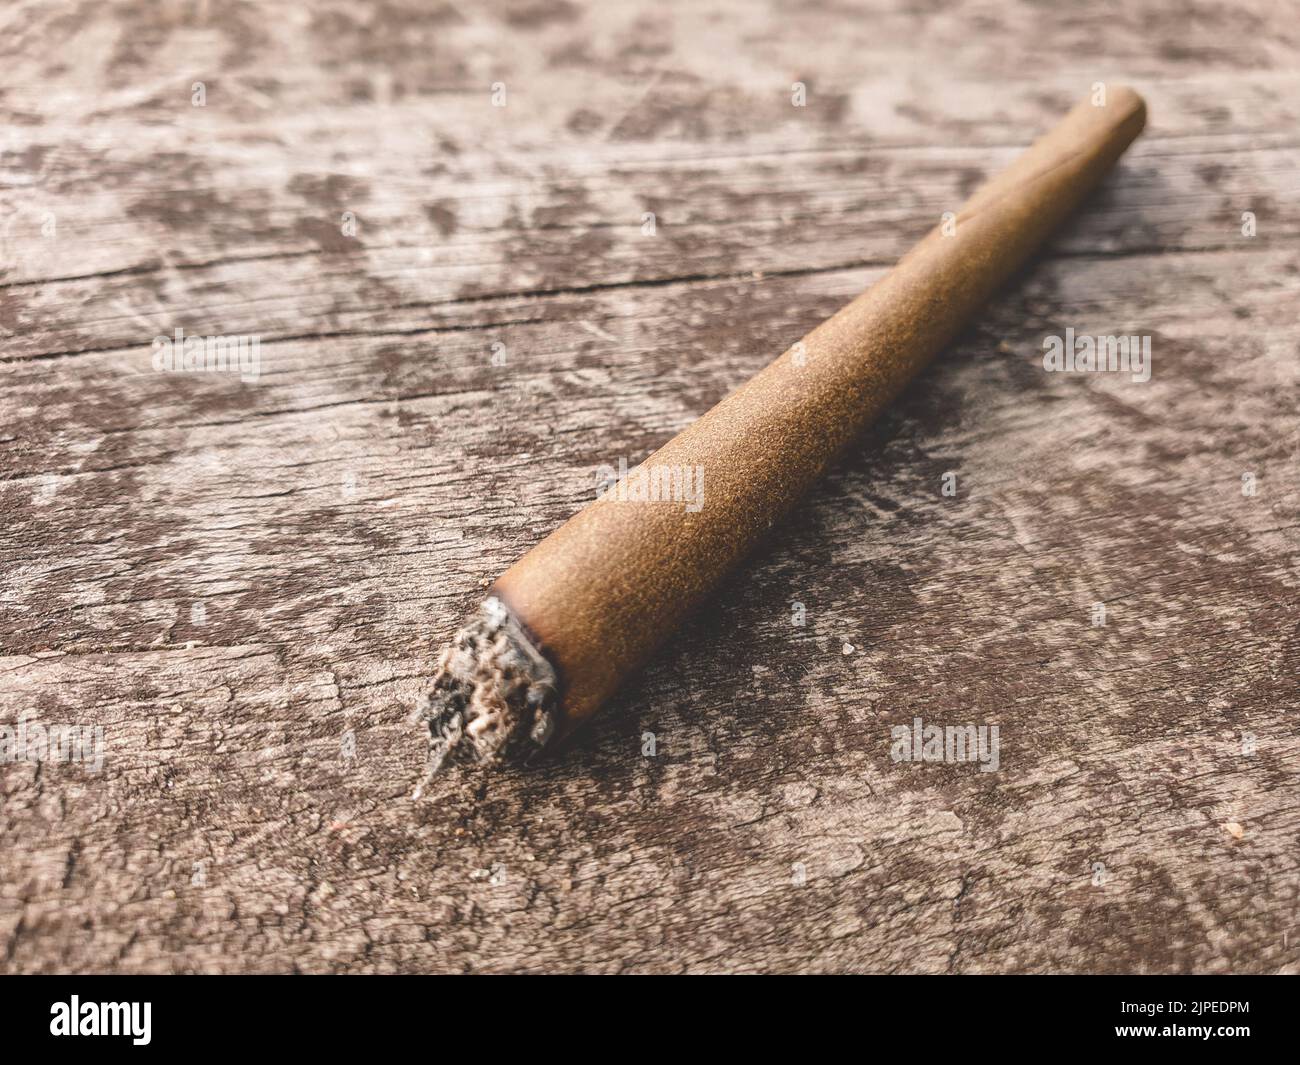 Detail of a lit marijuana or weed joint pictured on a brown wooden table outdoors. Stock Photo